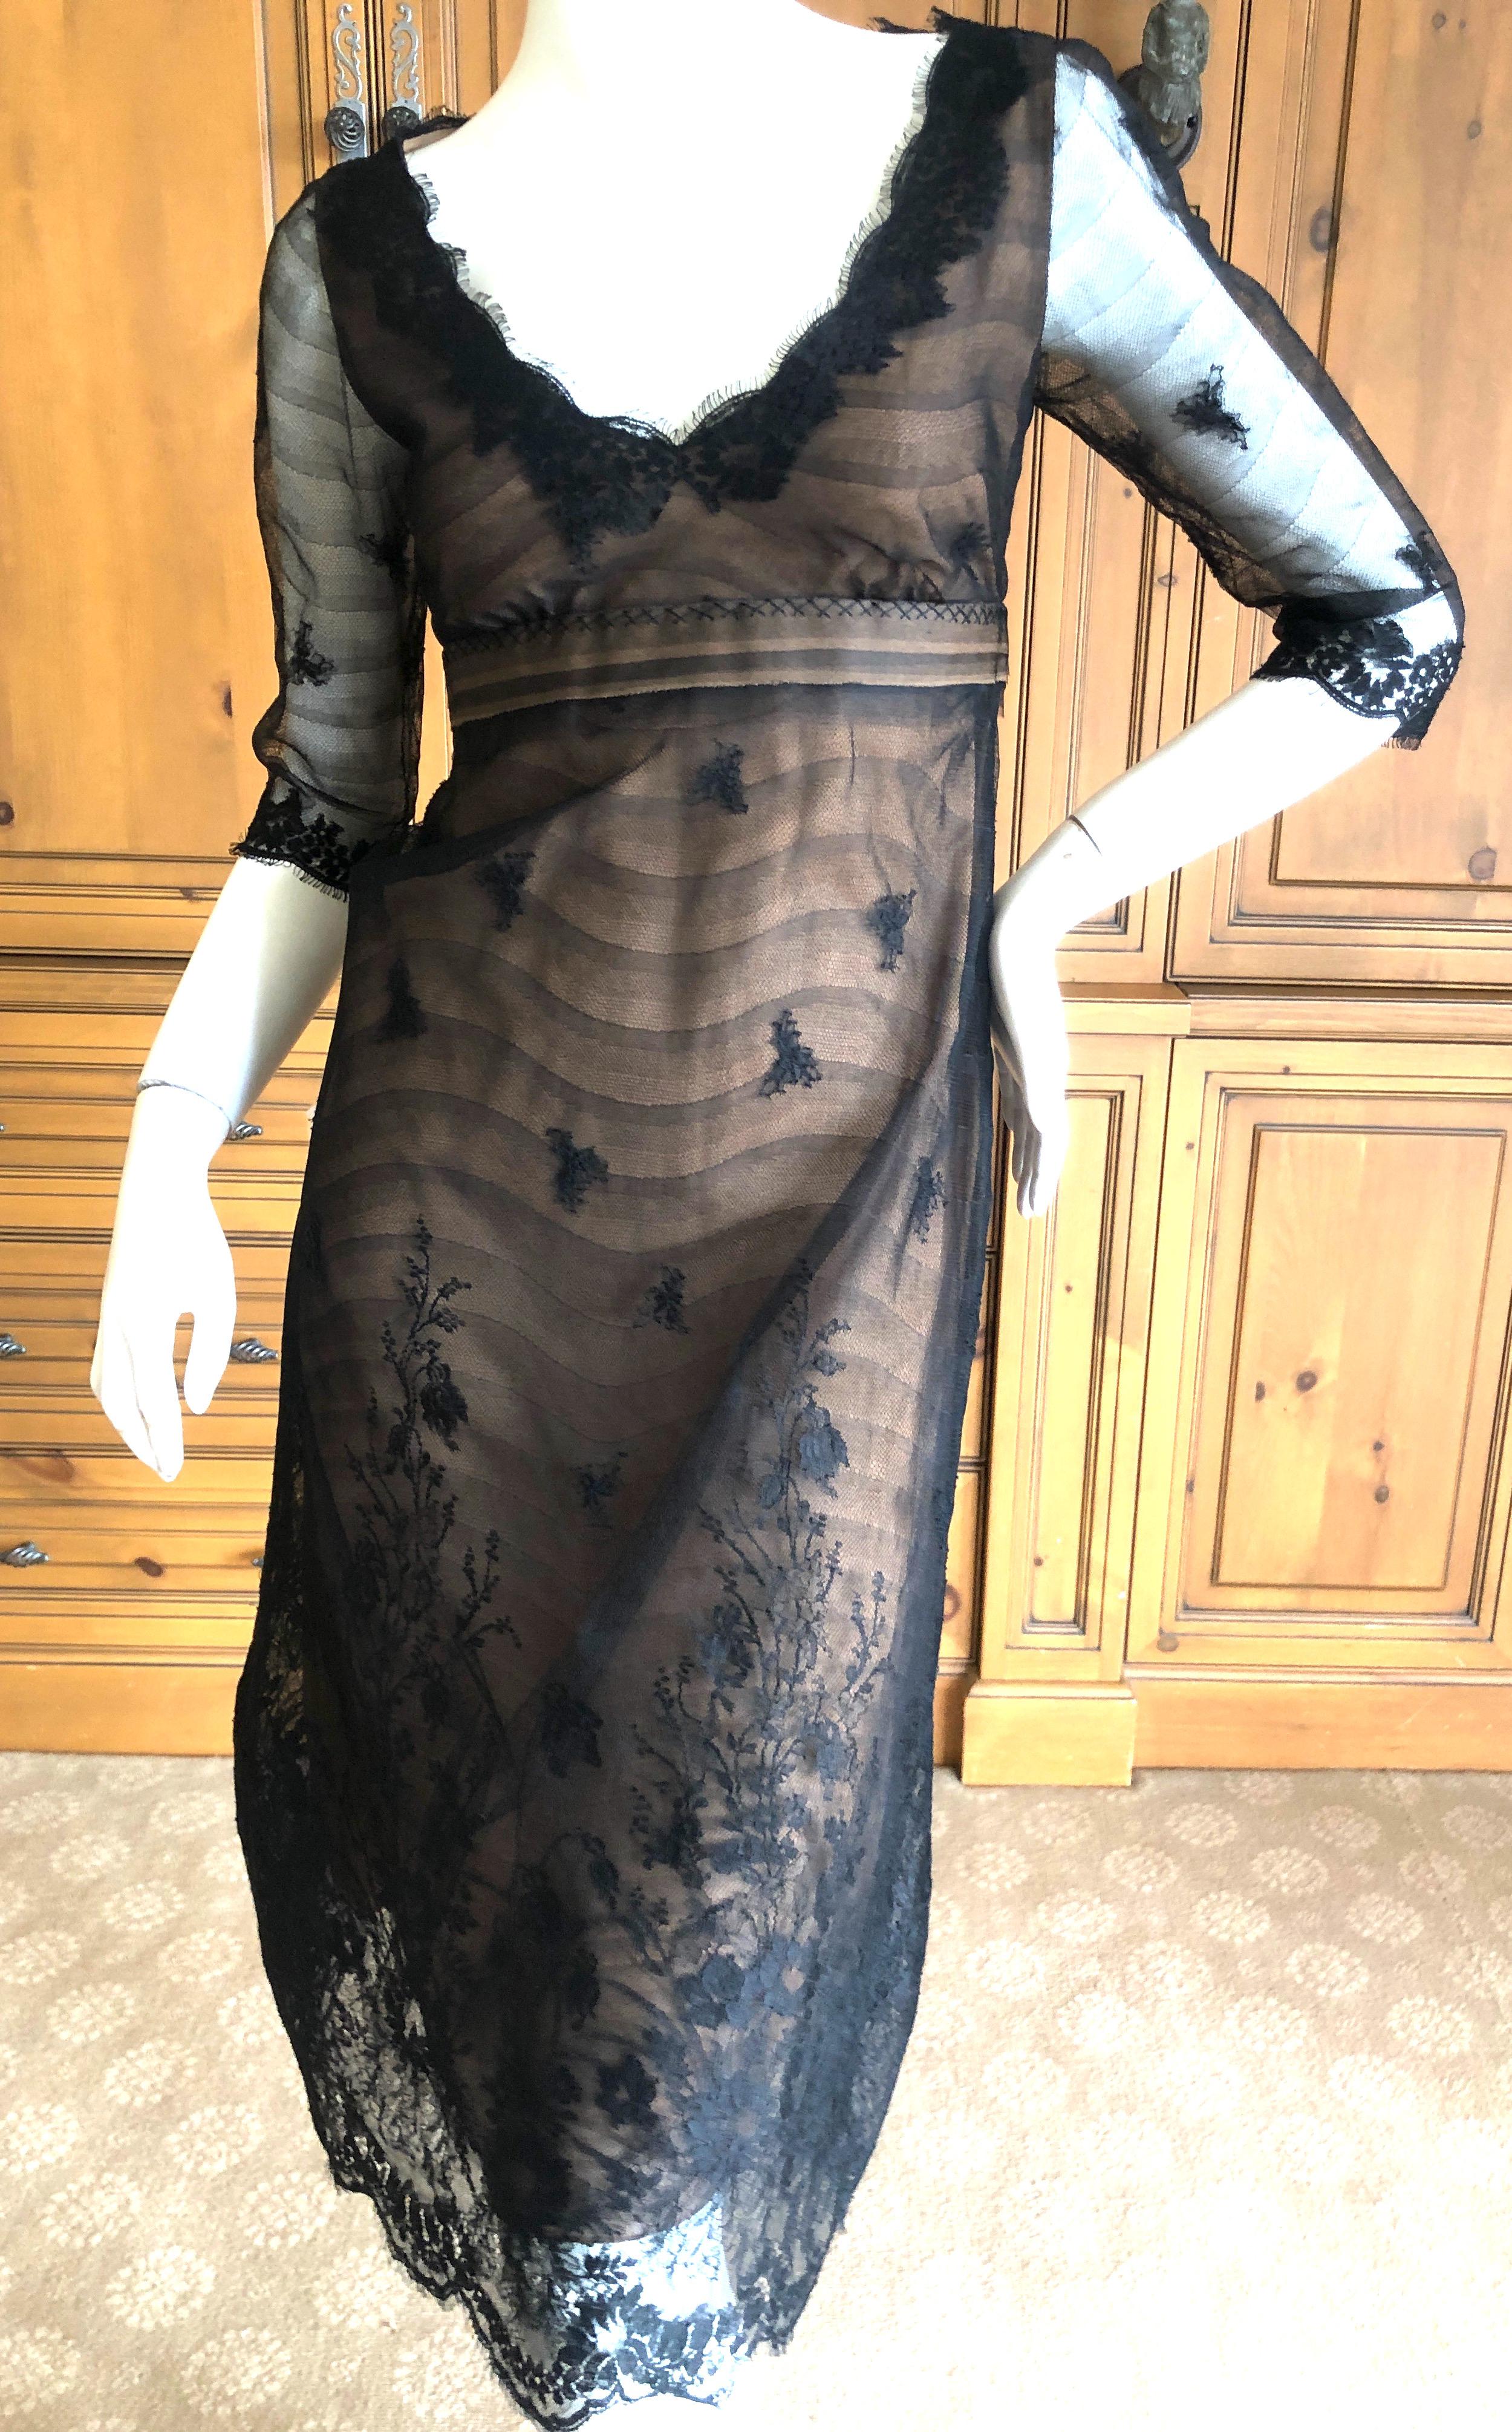 Isaac Mizrahi Vintage Brown Lace Overlay Day Dress
This is exquisite, so much prettier in person.
Size 4
Bust  34